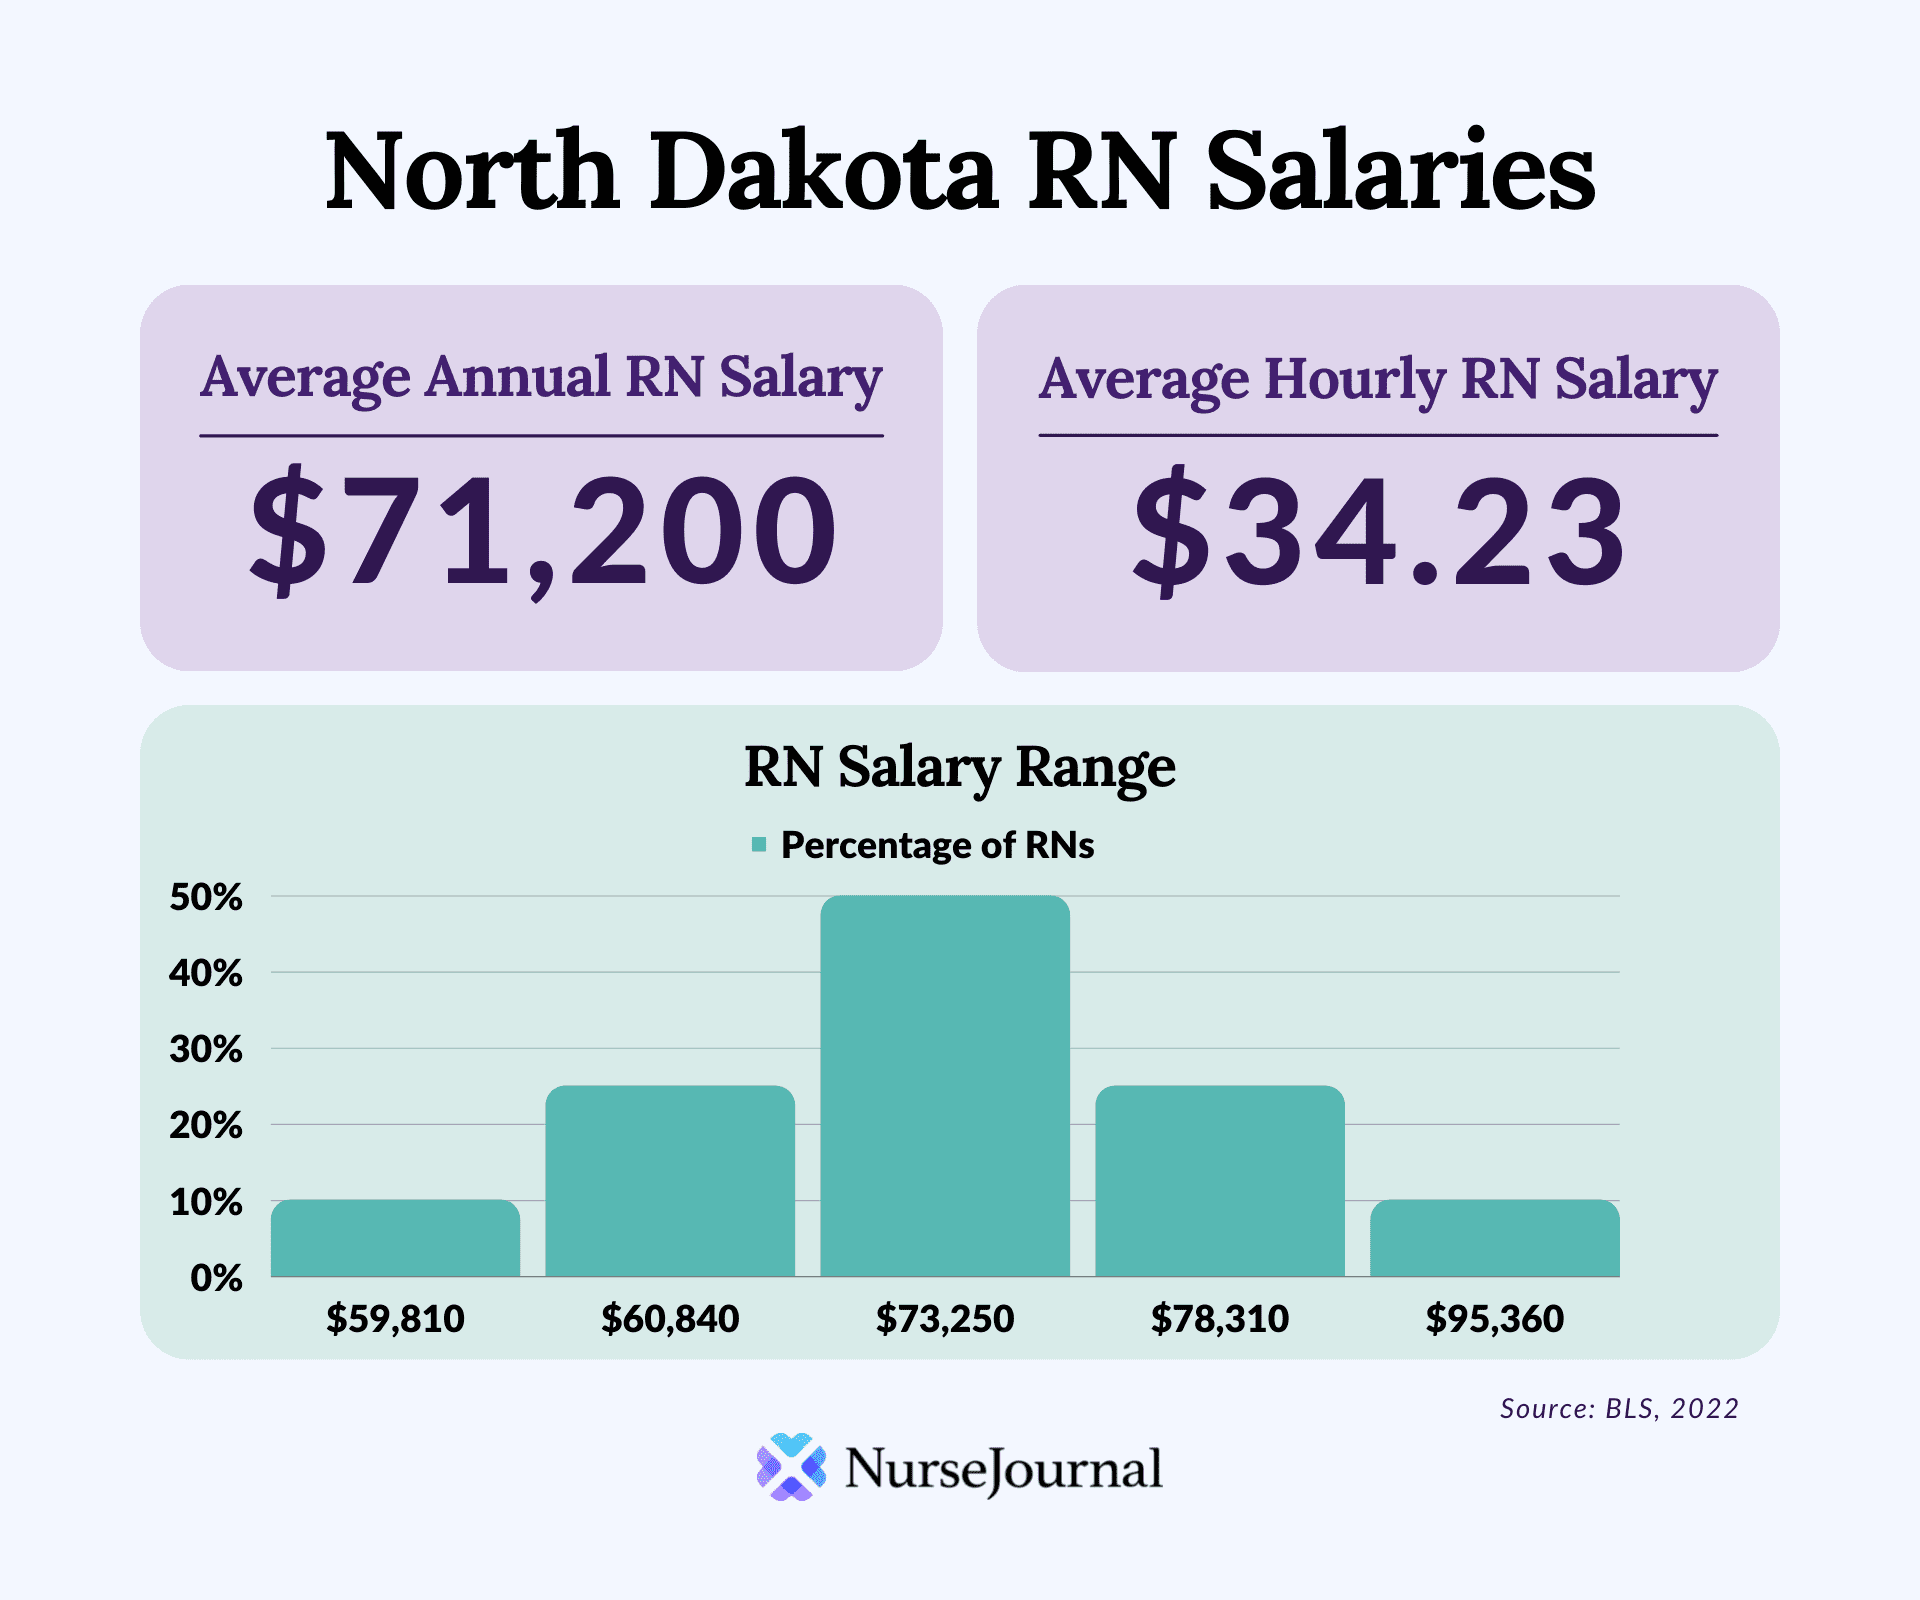 Infographic of registered nursing salary data in North Dakota. The average annual RN salary is %71,200. The average hourly RN salary is $34.23. Average RN salaries range from $59,810 among the bottom 10th percentile of earners to $95,360 among the top 90th percentile of earners.